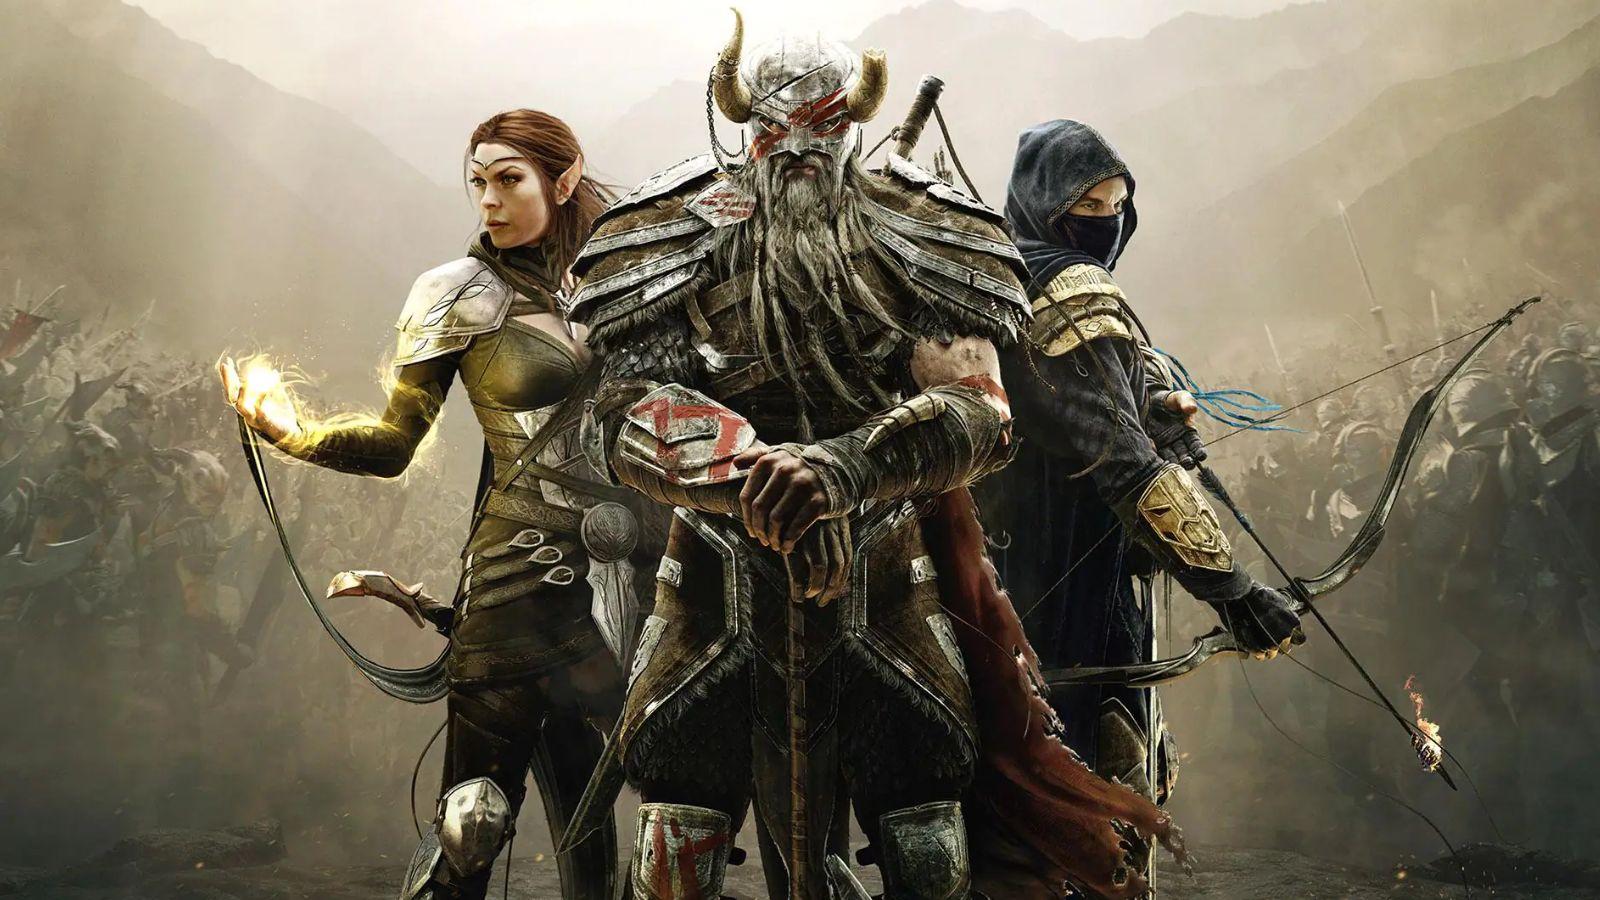 Elder Scrolls Online player count hits 15 million - The Tech Game